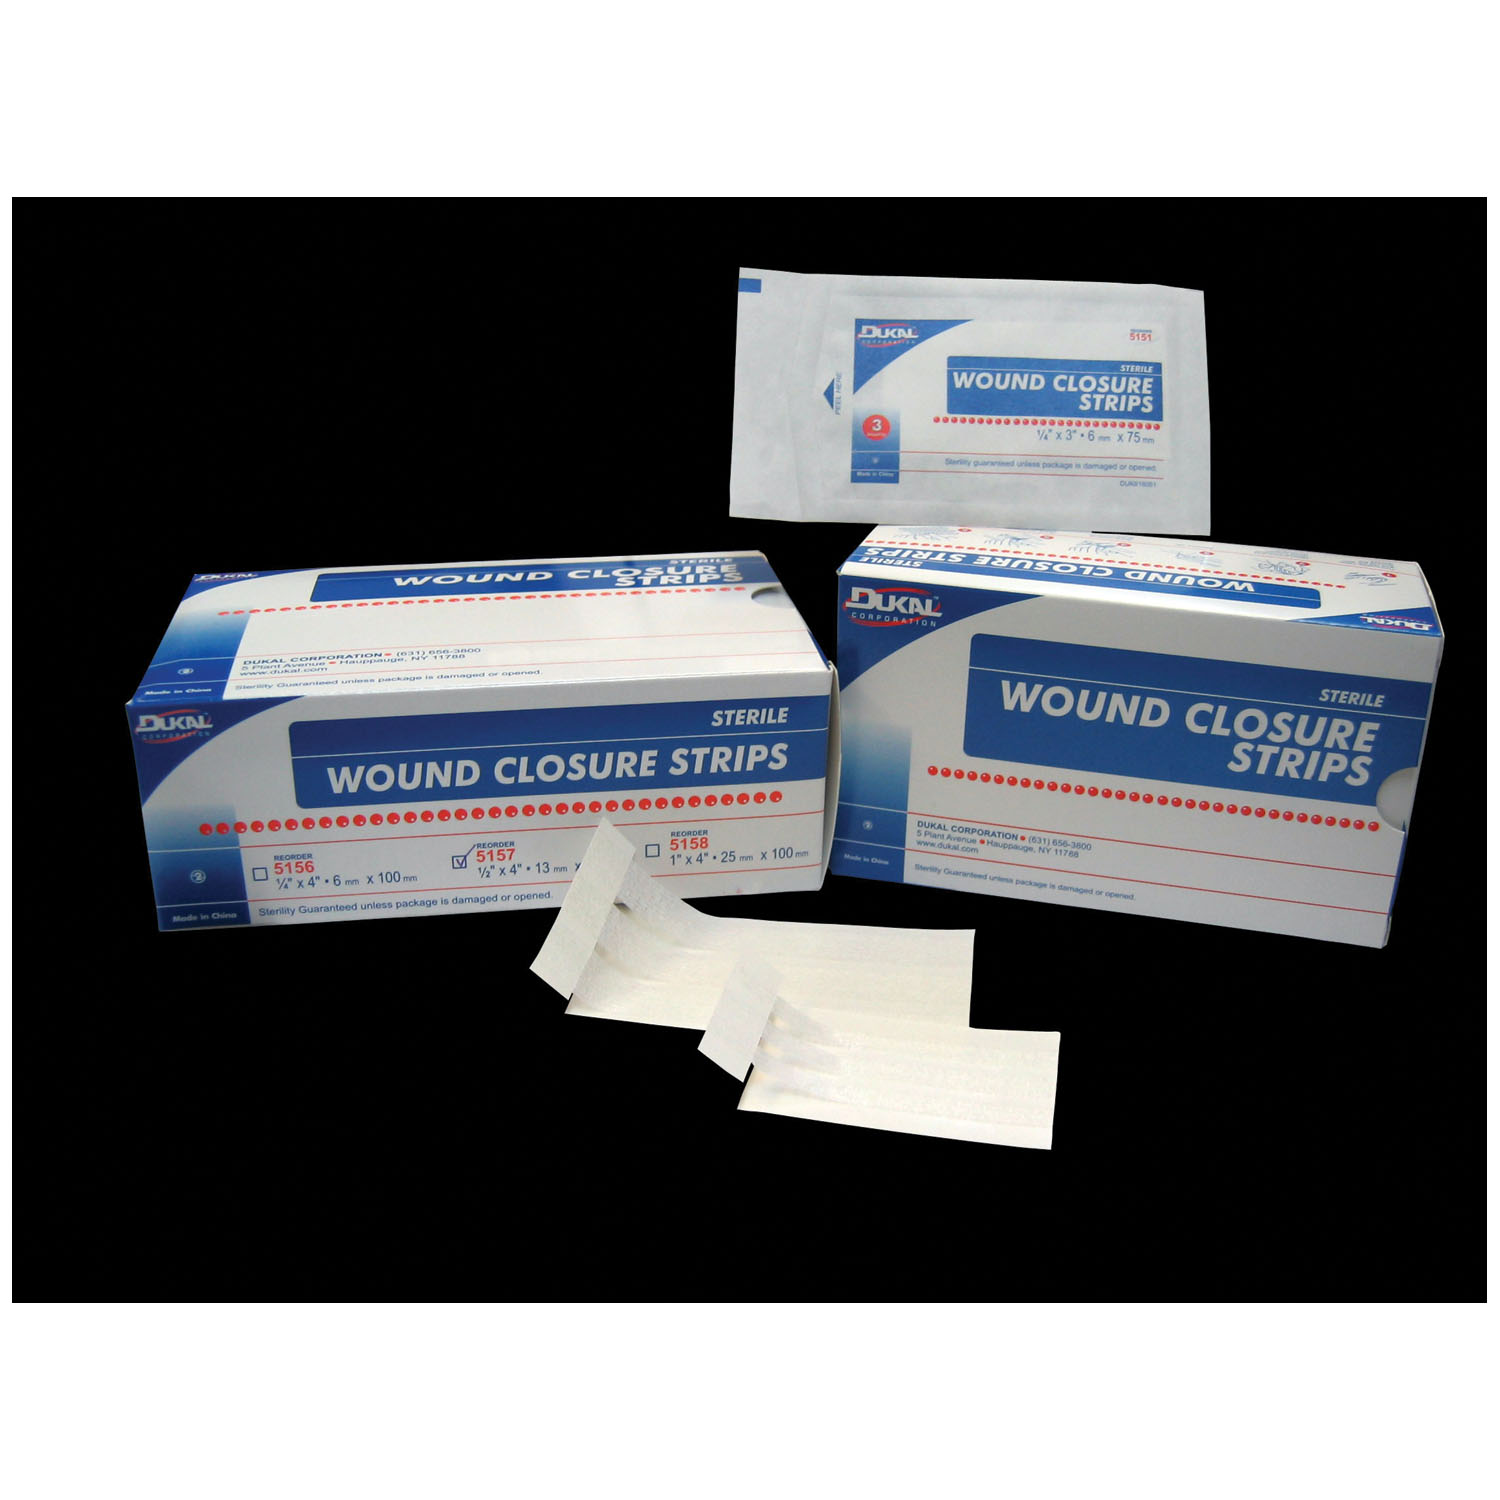 DUKAL WOUND CLOSURE STRIPS : 5158 CS $187.33 Stocked